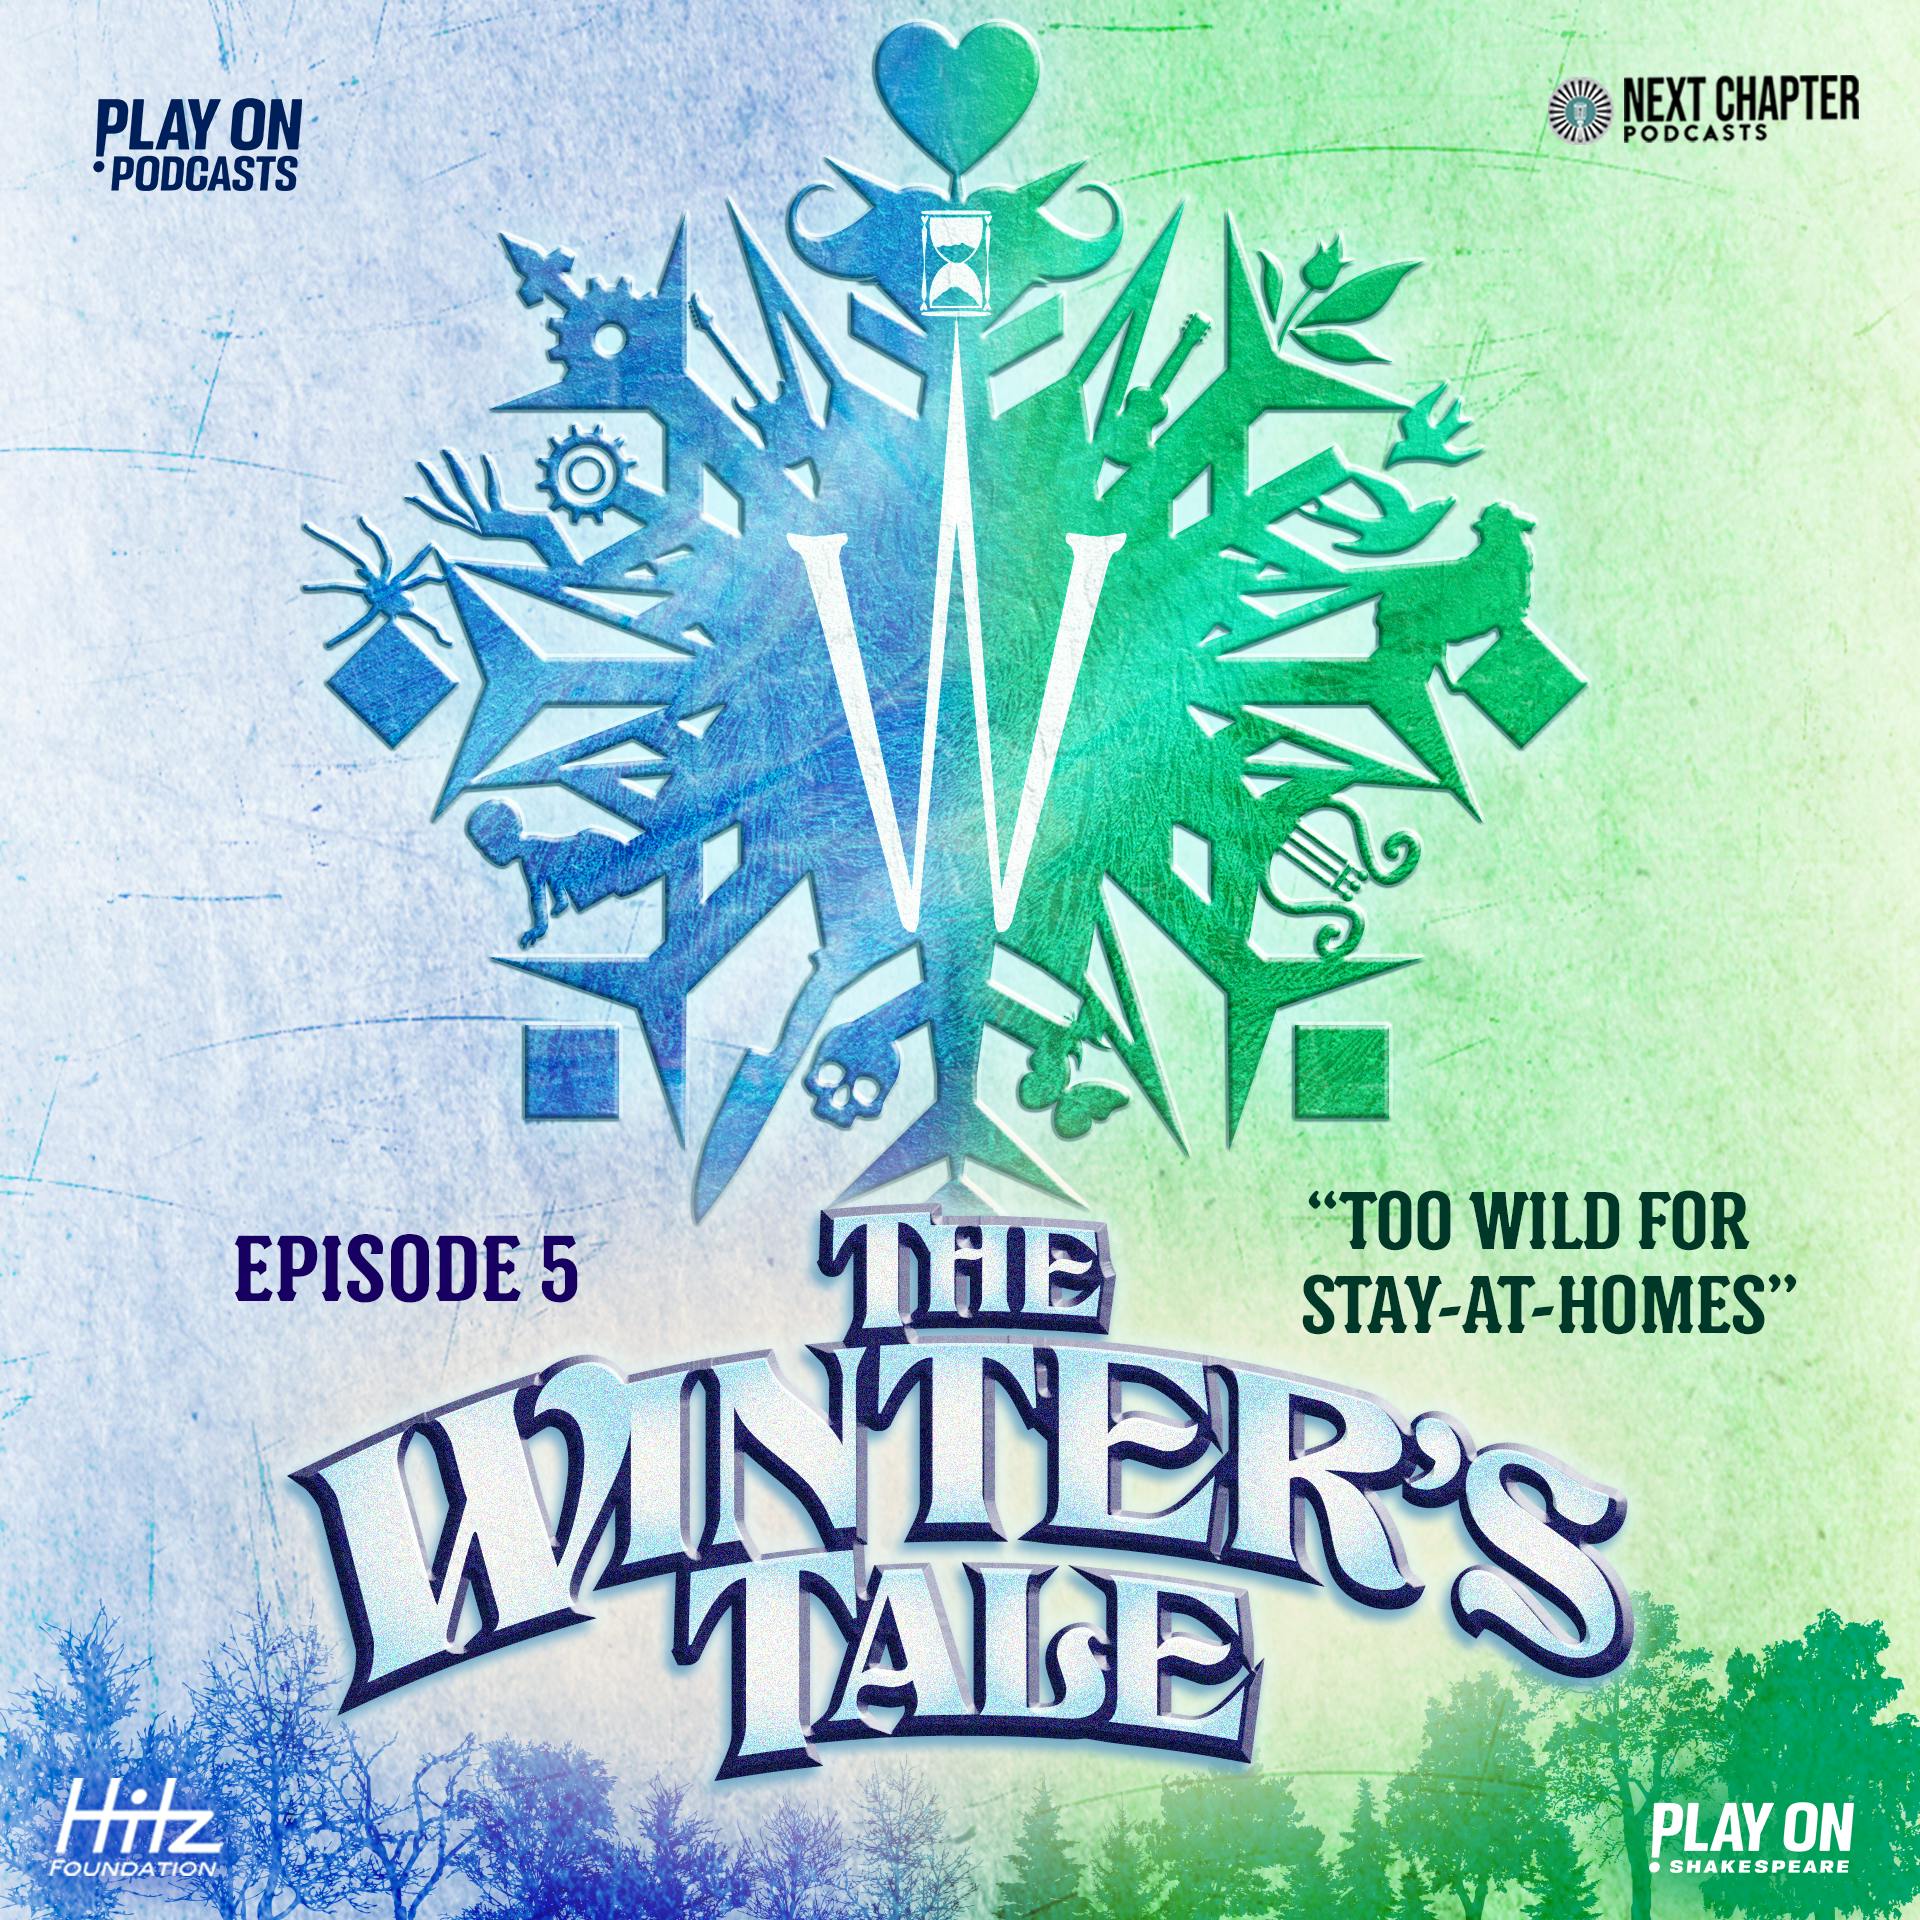 The Winter's Tale - Episode 5 - Too Wild For Stay-At-Homes